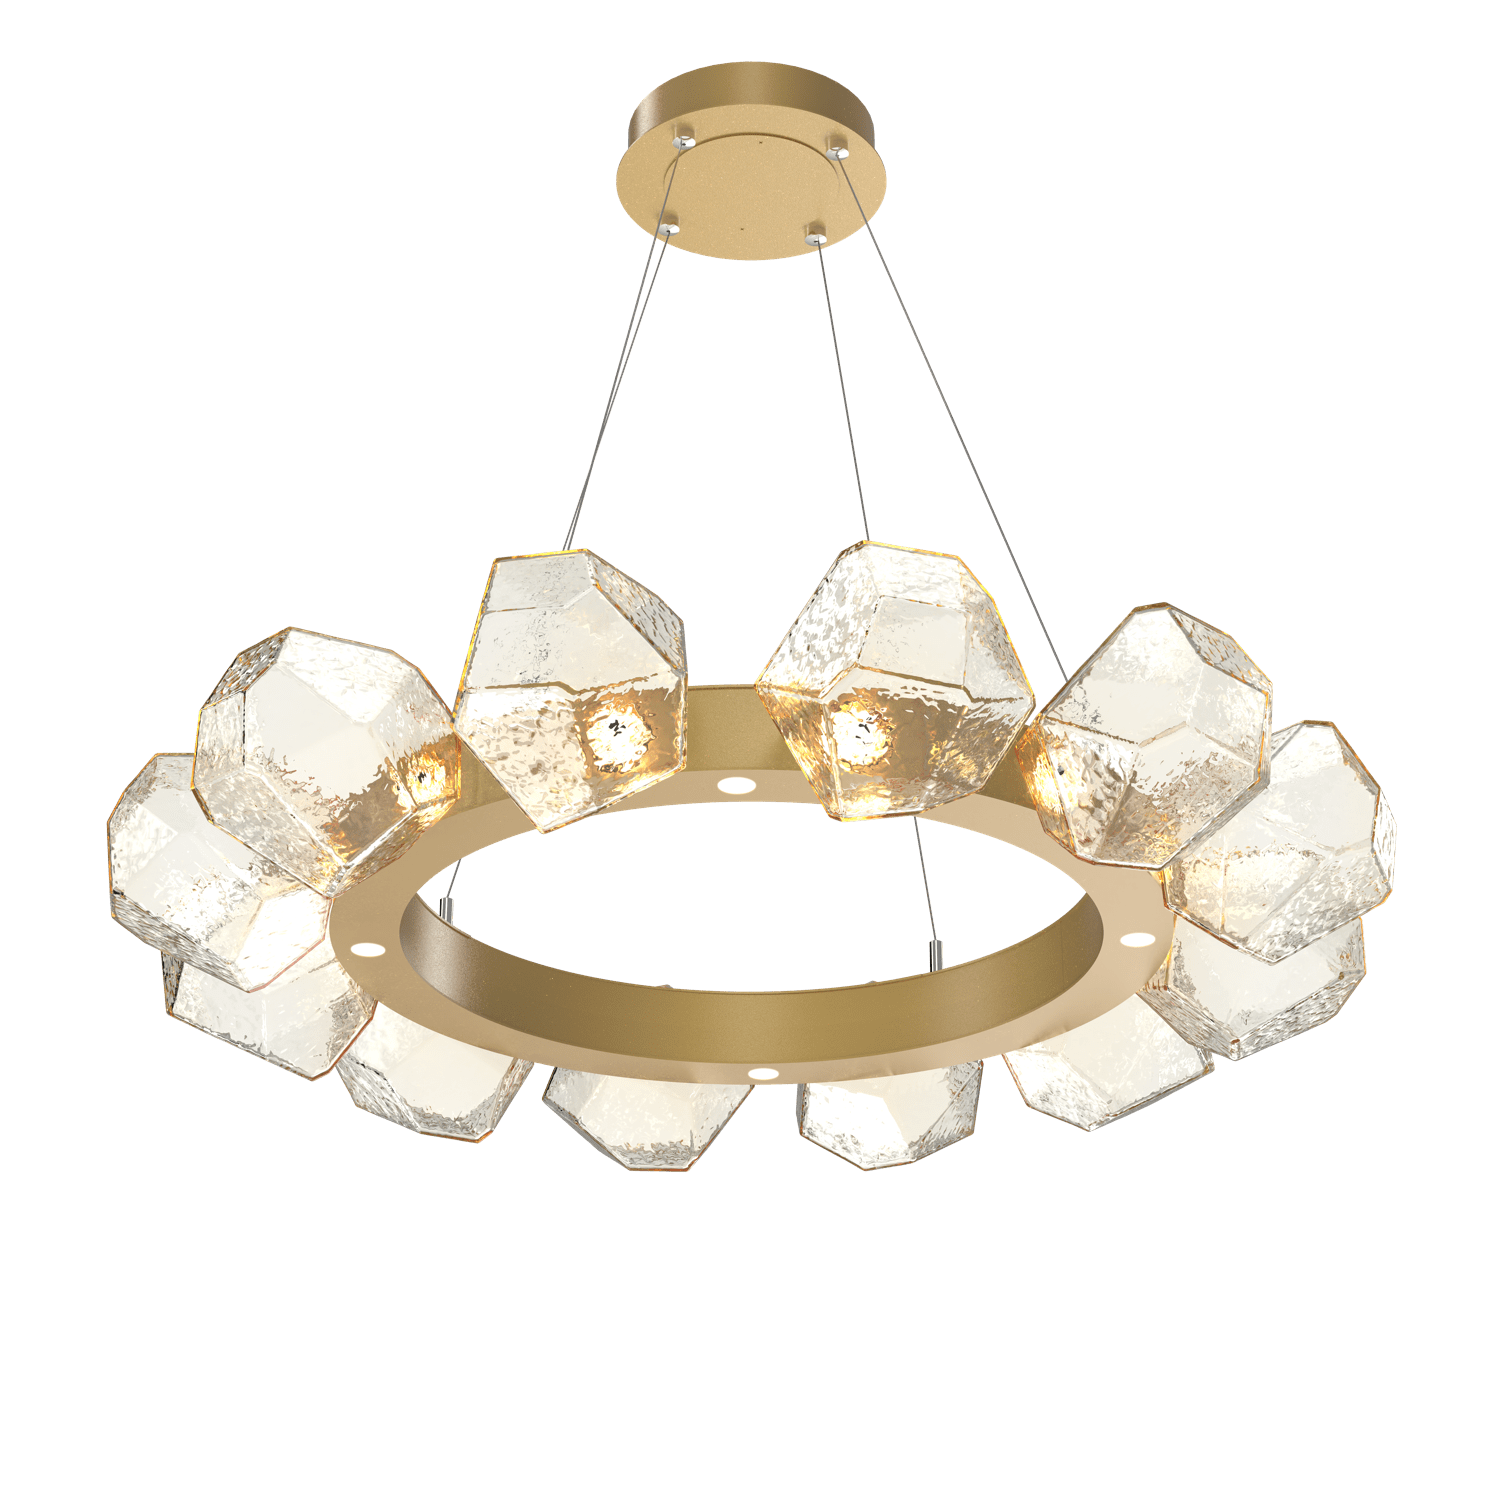 CHB0039-36-GB-A-Hammerton-Studio-Gem-36-inch-radial-ring-chandelier-with-gilded-brass-finish-and-amber-blown-glass-shades-and-LED-lamping